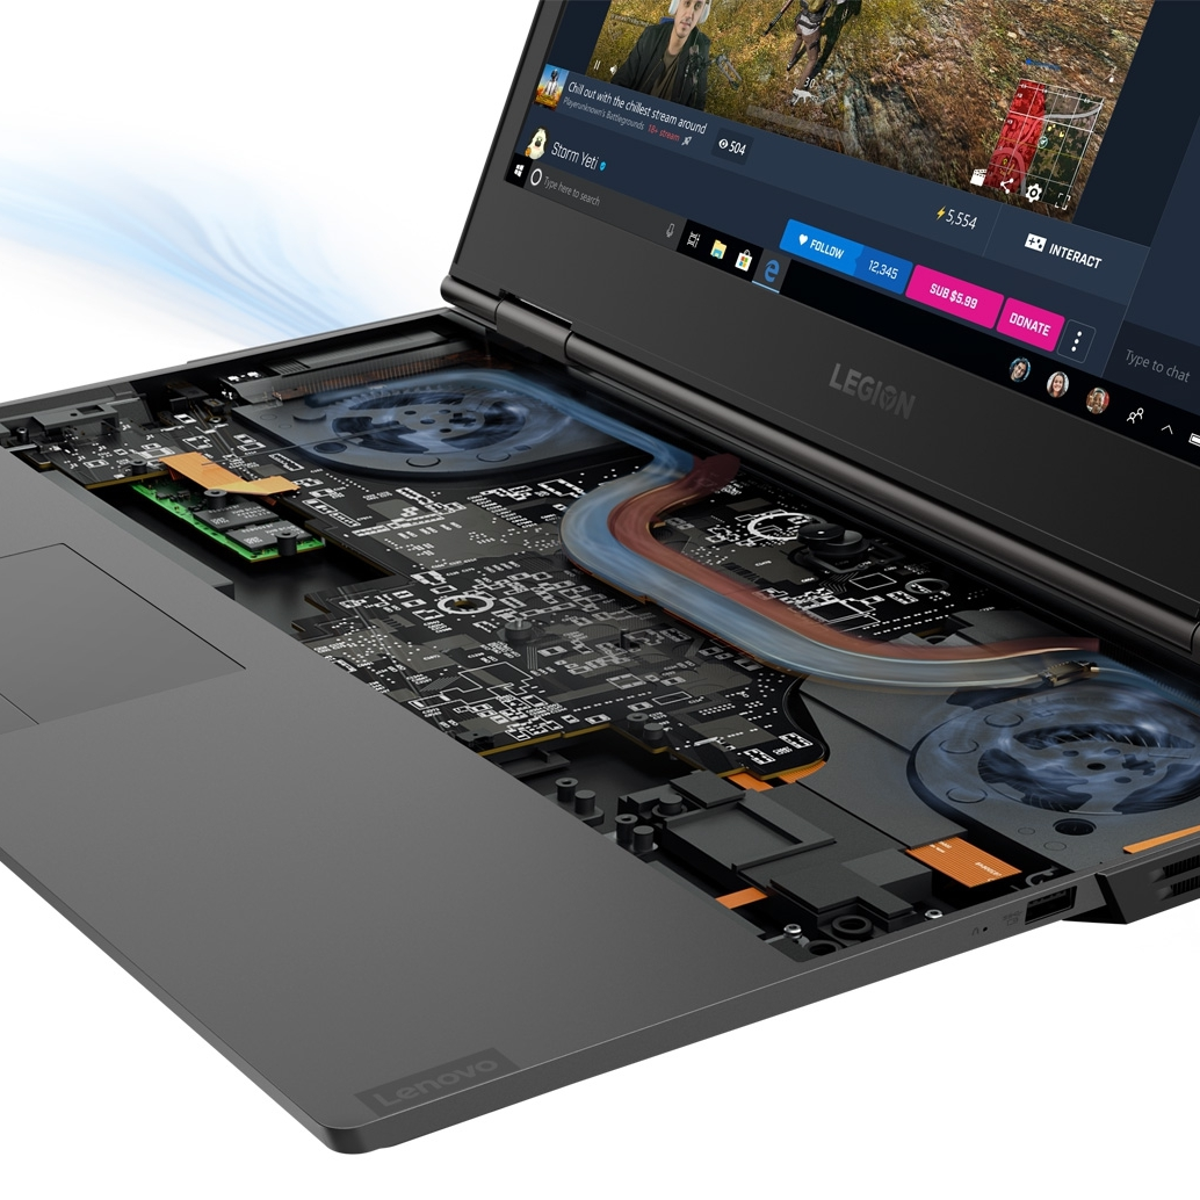 Best gaming laptops revealed at CES 2019: RTX graphics, 8th-gen